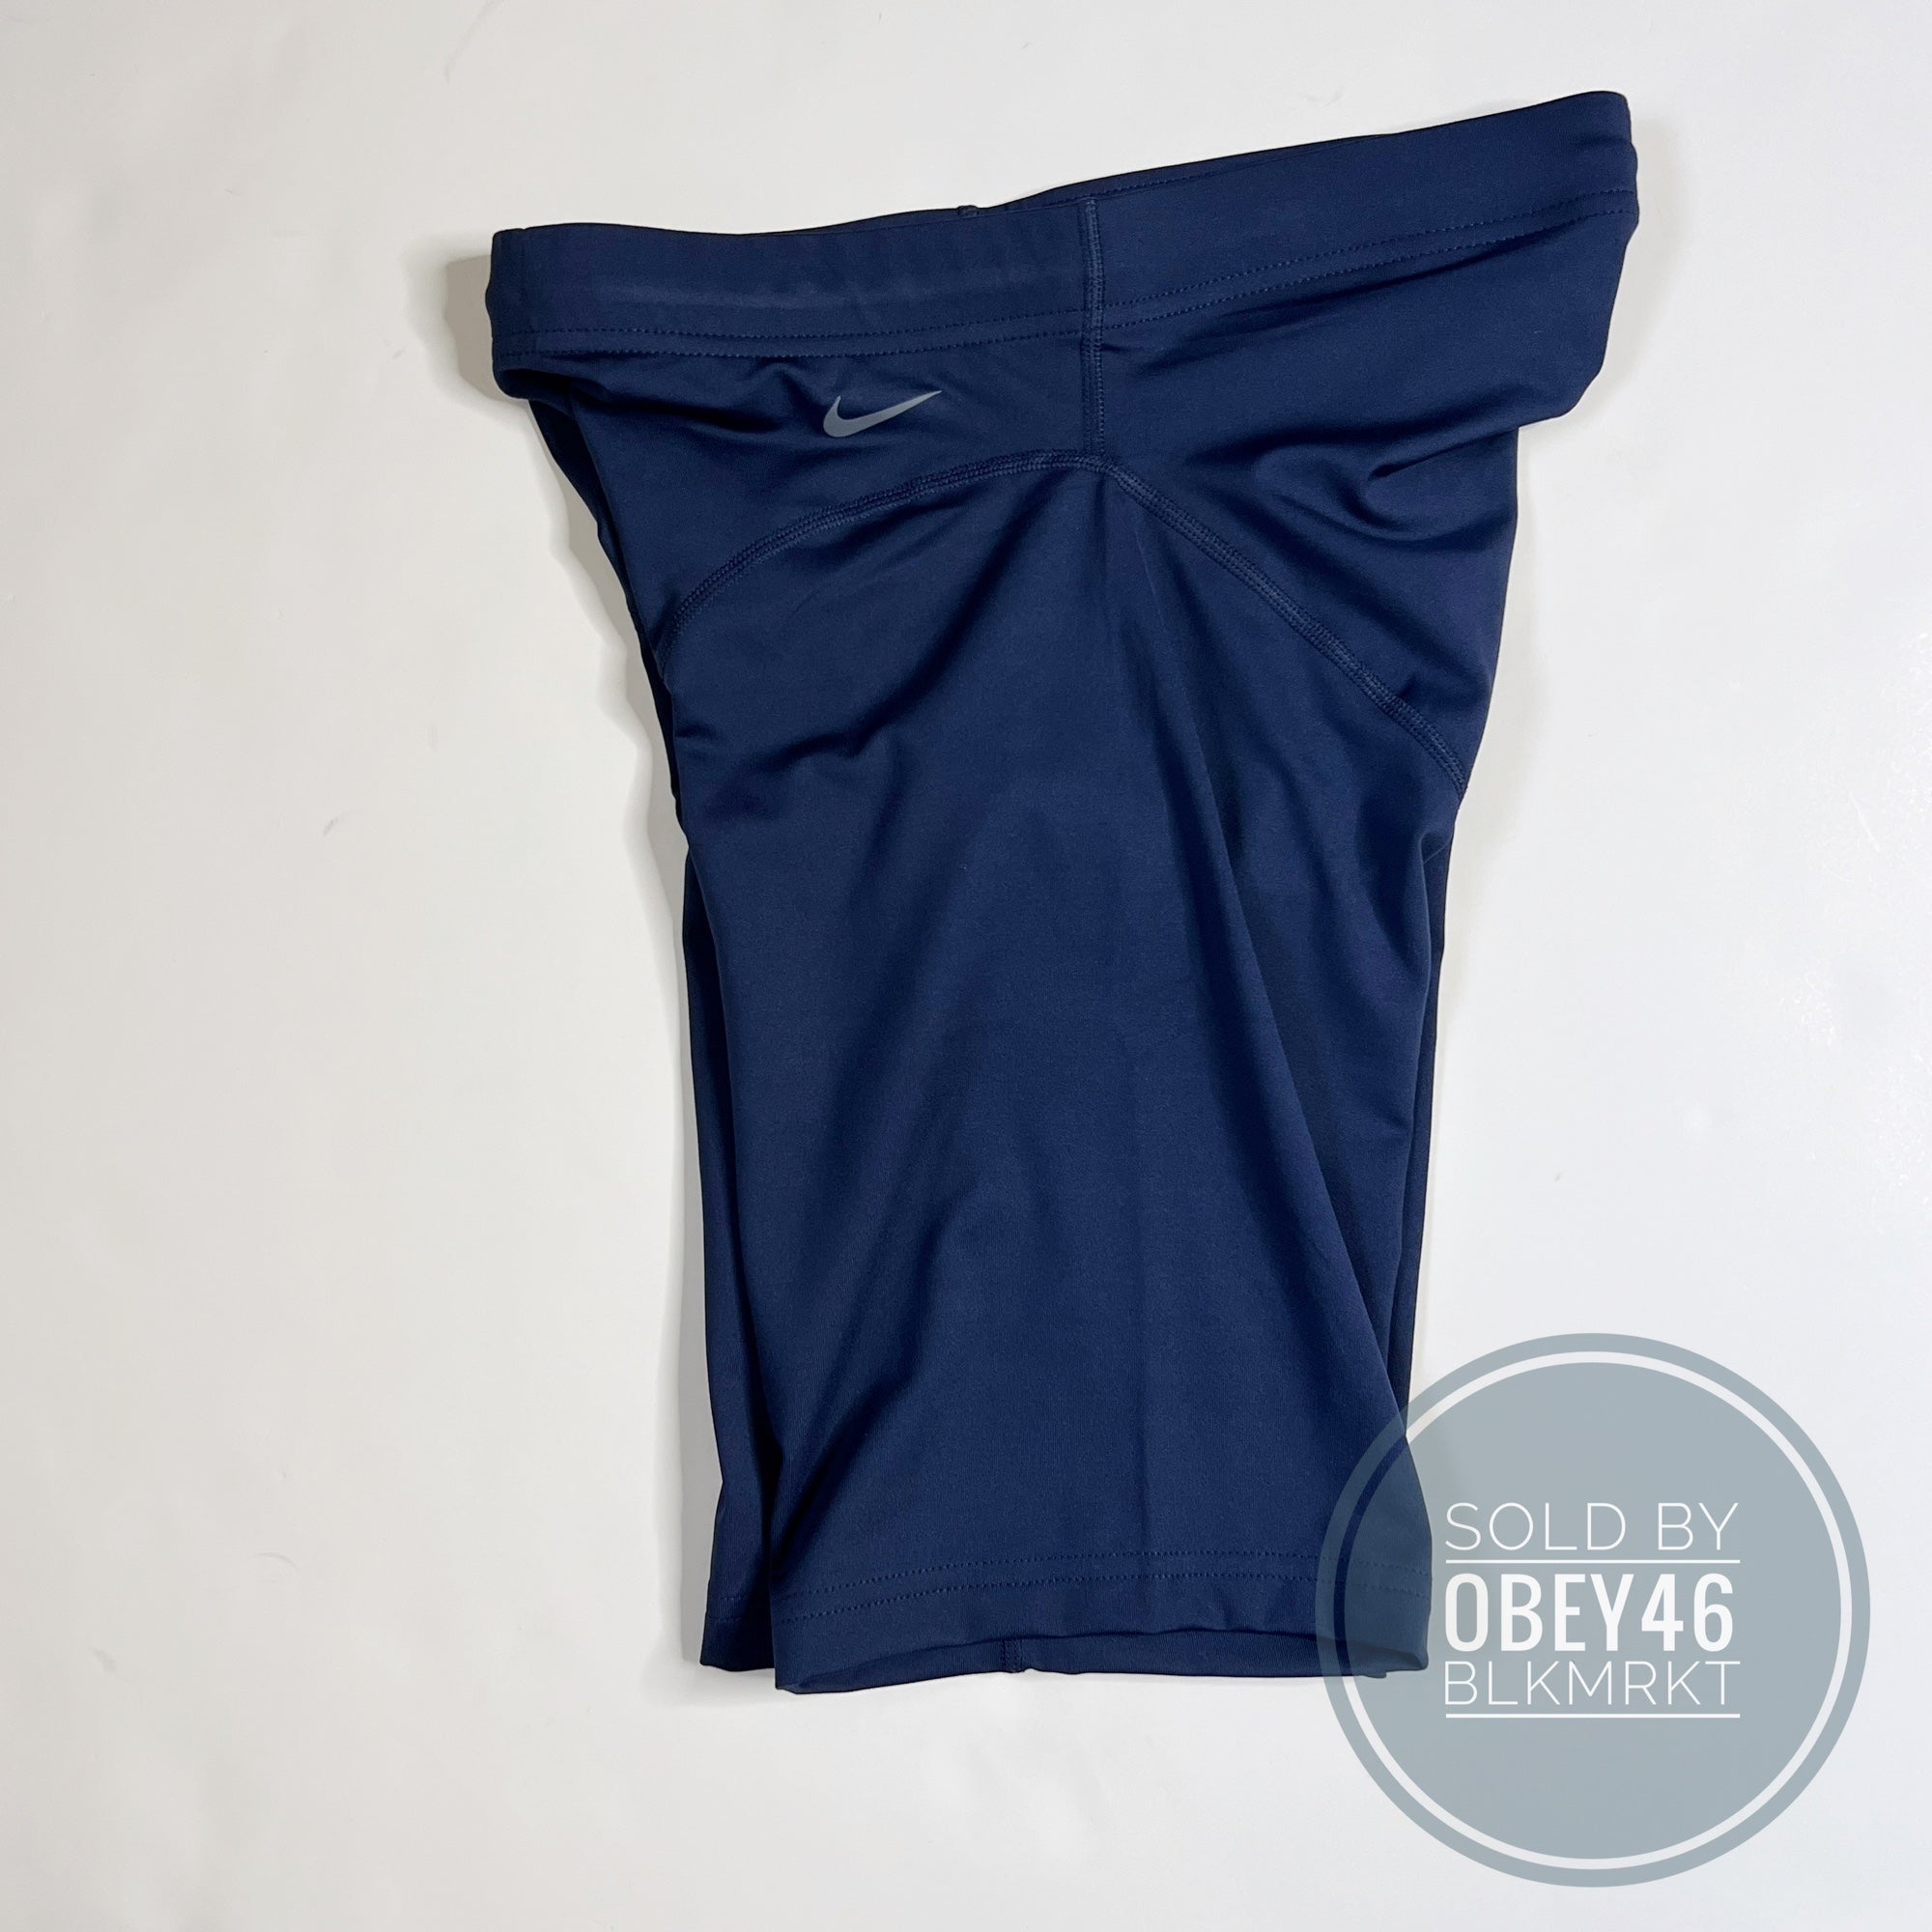 Nike Pro Elite Compression Shorts Blue Made in USA PE Size XL